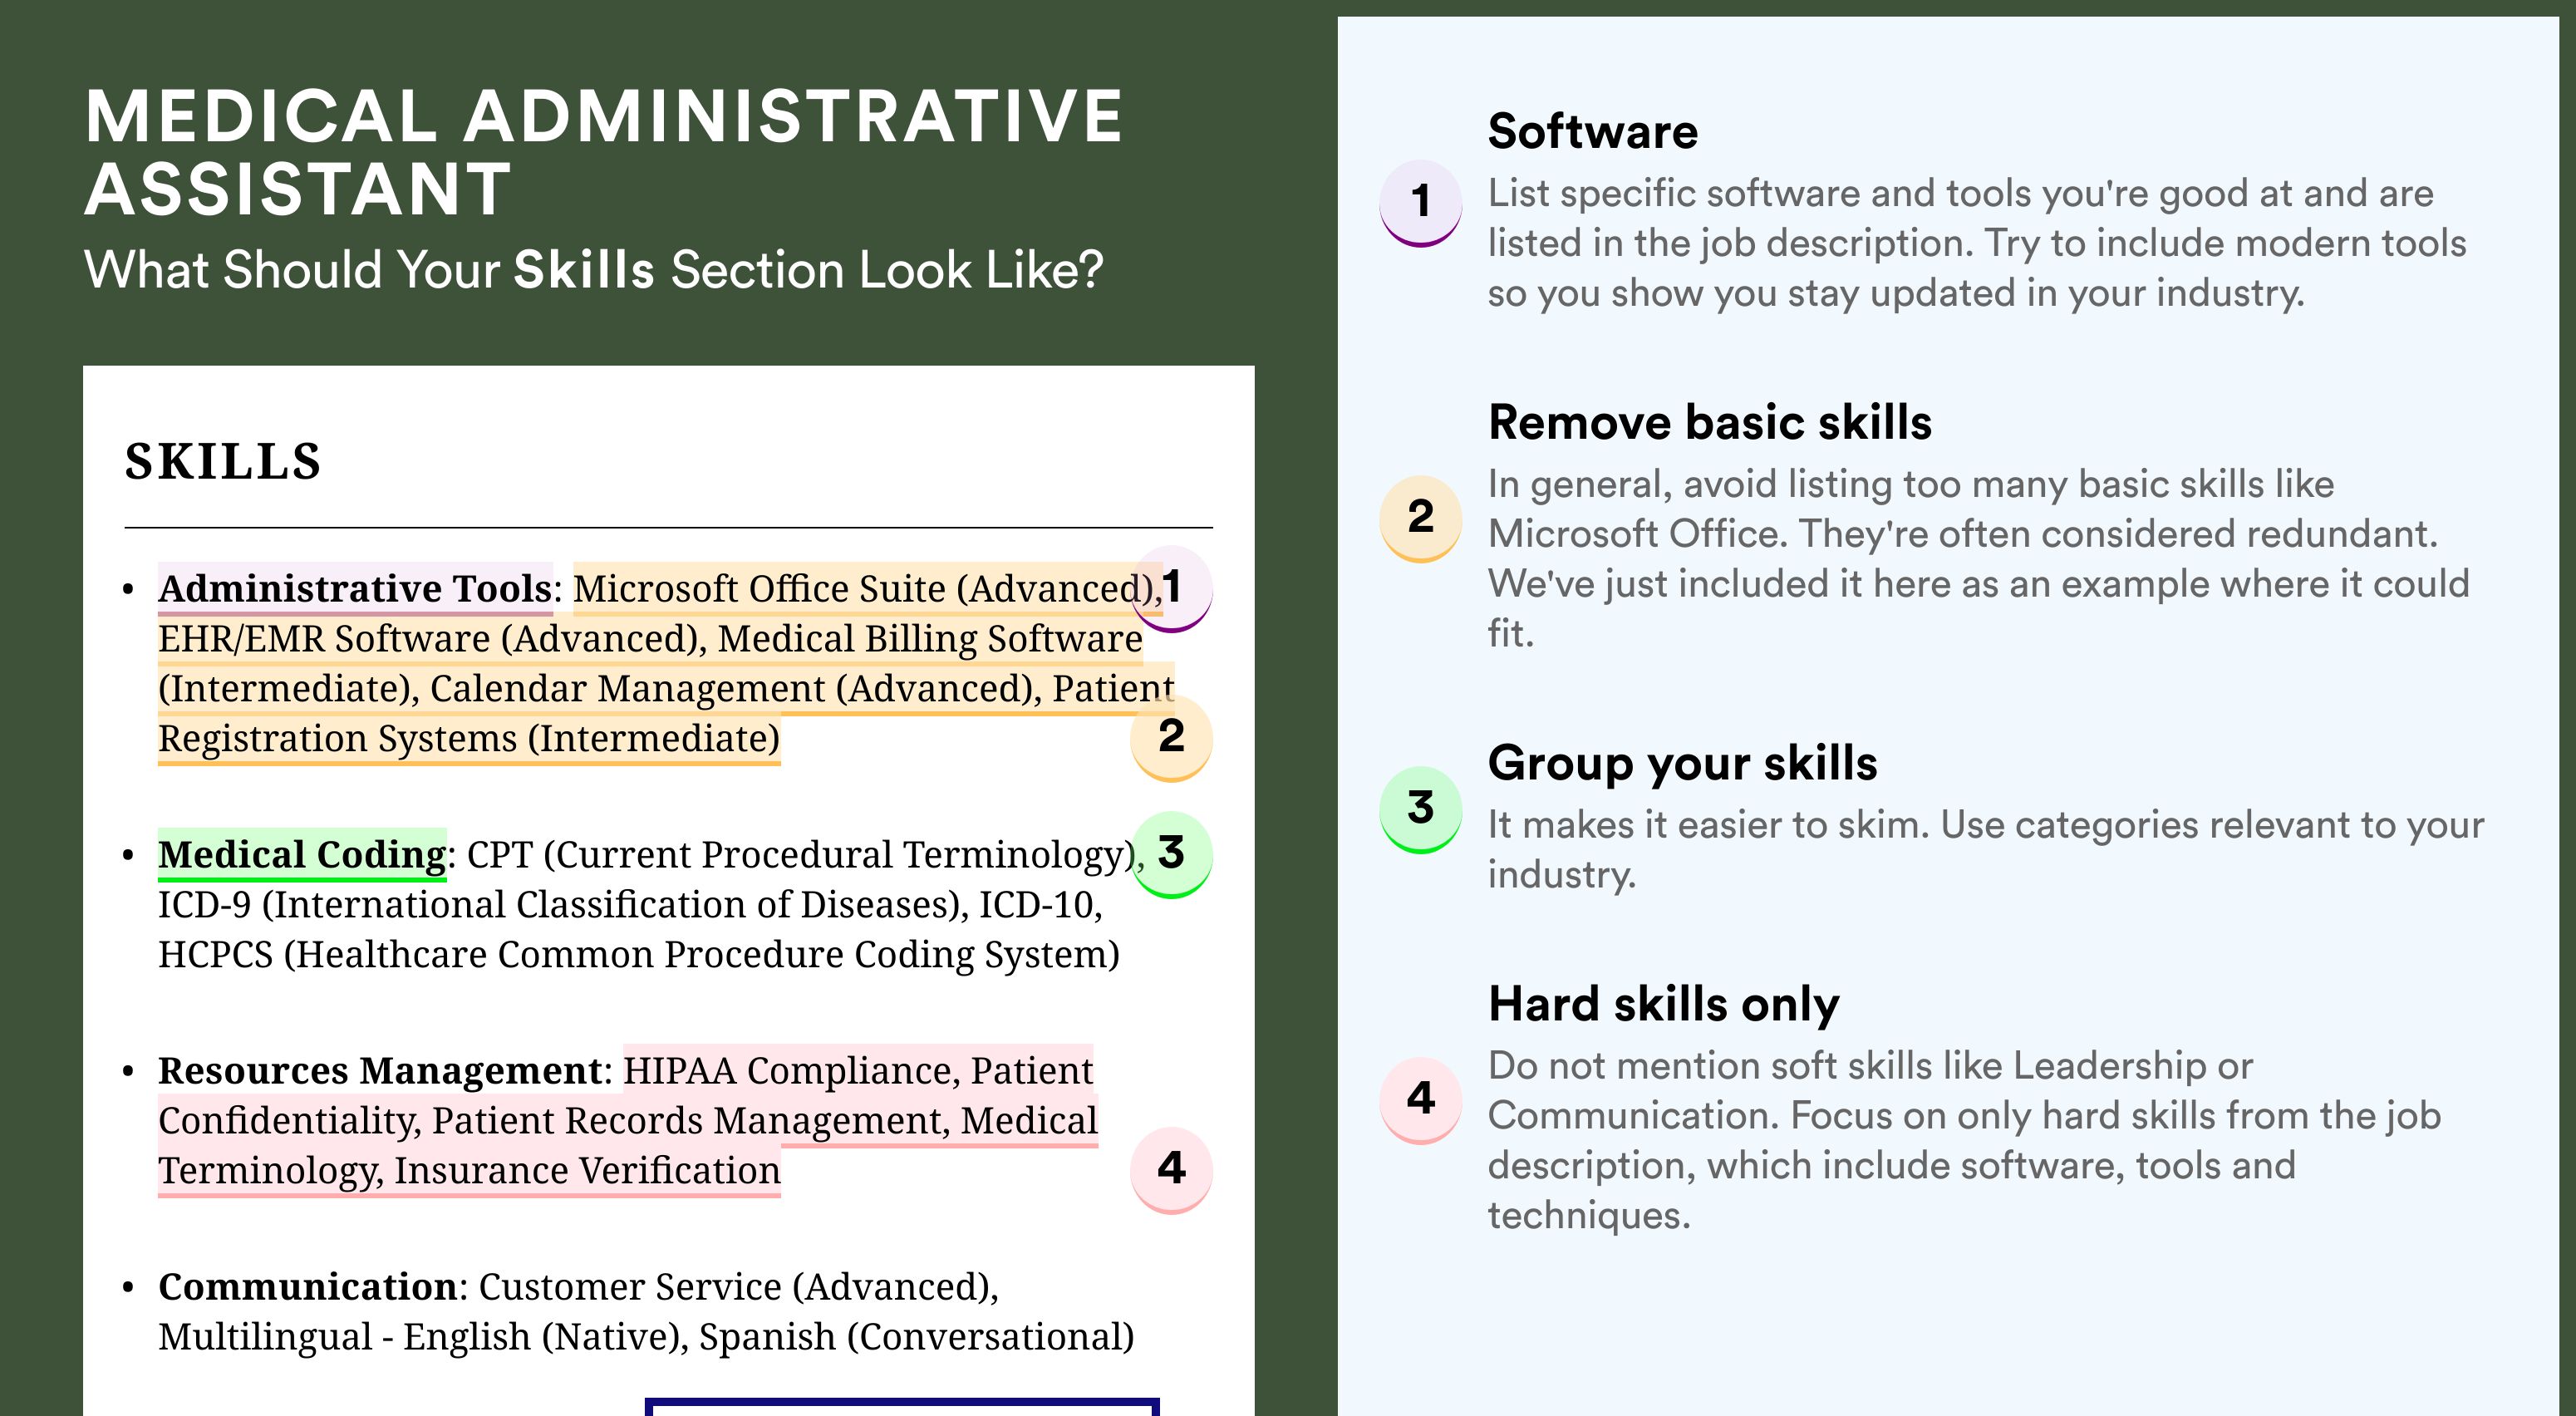 How To Write Your Skills Section - Medical Administrative Assistant Roles